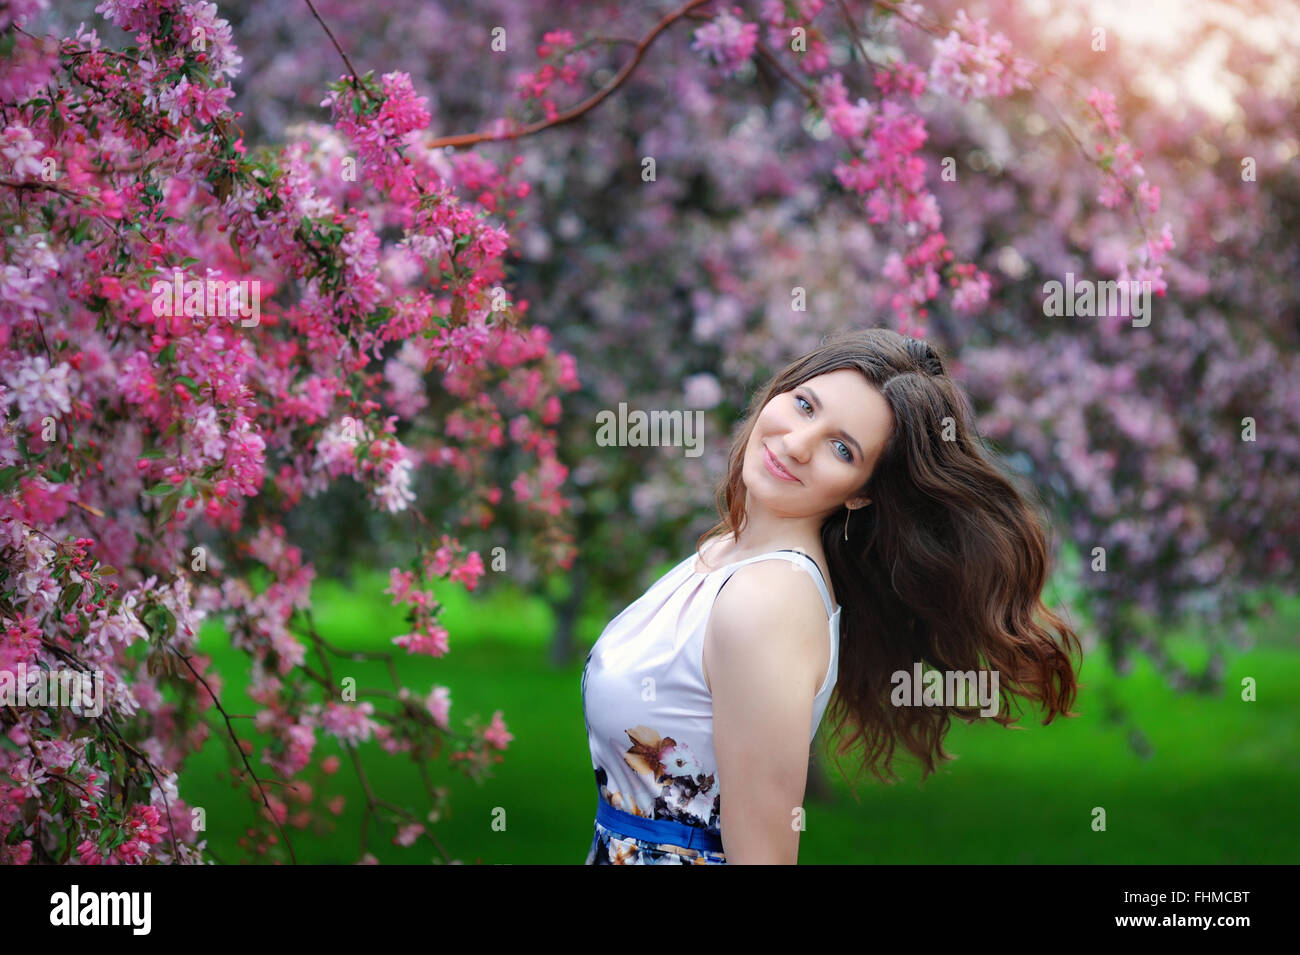 Beautiful young girl in spring flowers garden lifestyle portrait Stock Photo